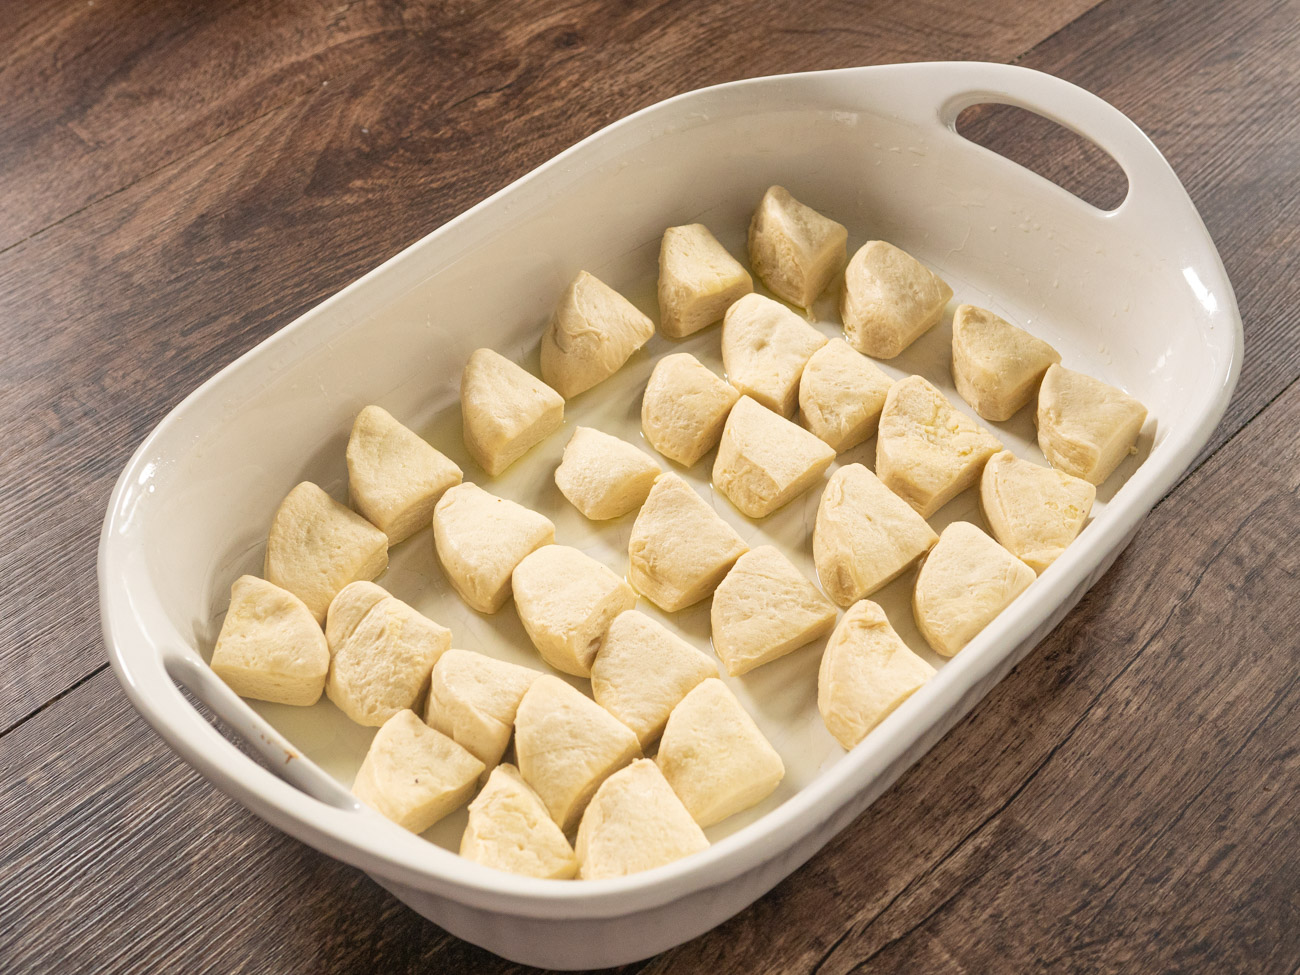 Cut biscuits into quarters and arrange evenly in the baking dish. Layer frozen vegetables and shredded cheeses on top of the biscuits and set aside.